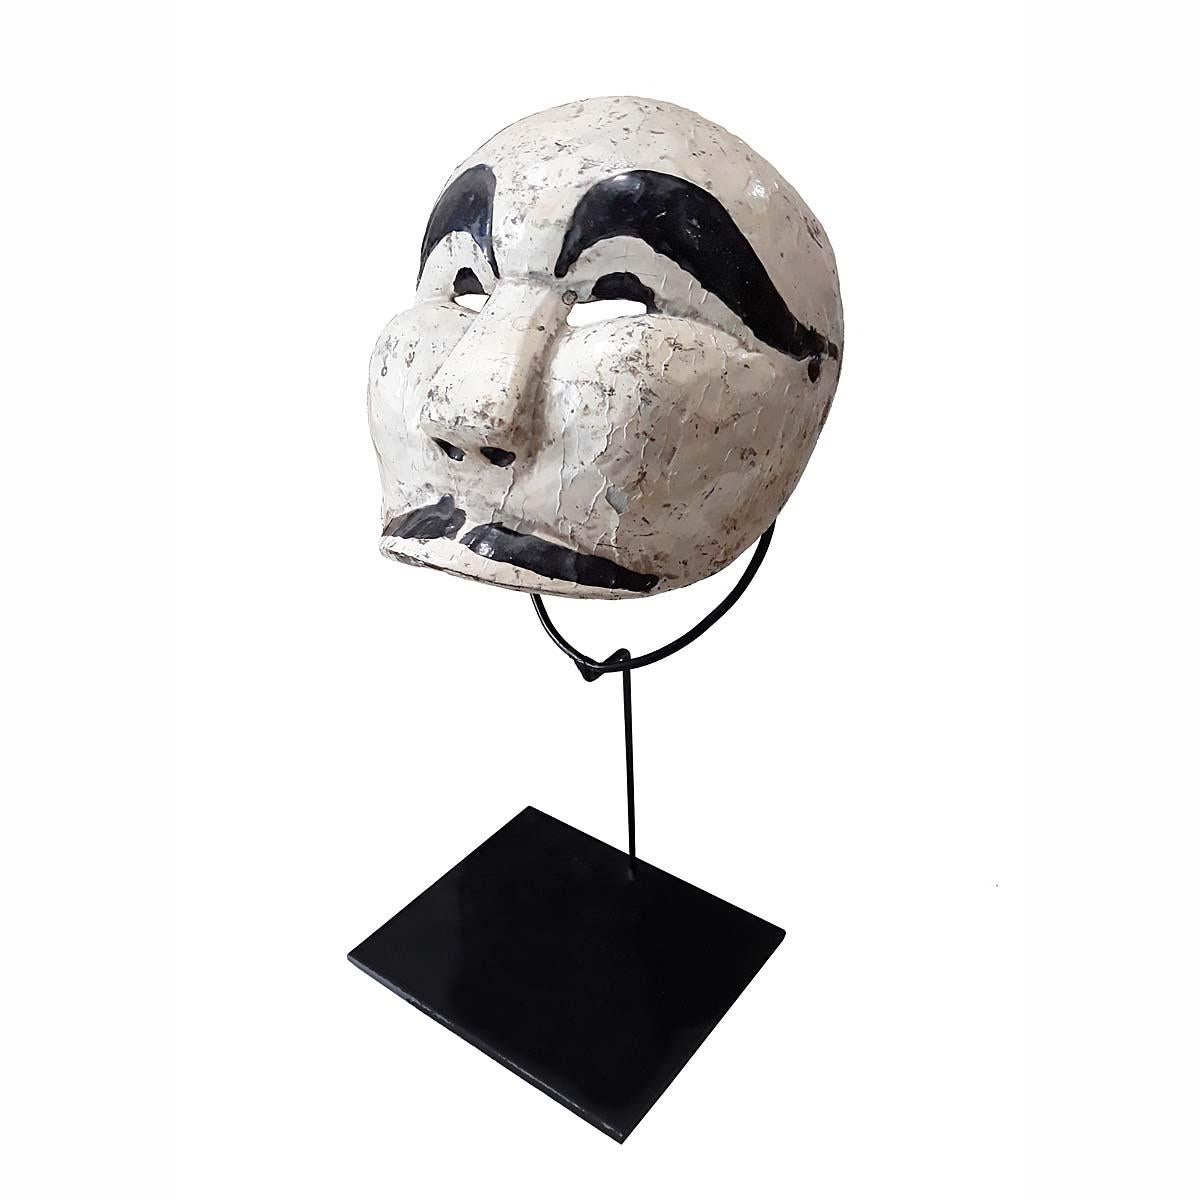 A vintage Penasar mask from Indonesia, circa 1975-1980. Hand-carved teak, polychromed in white and black. Mounted on a black metal stand. 

This type of mask is used at Indonesian Topeng or Mask theater dances, where traditional stories of nobles,